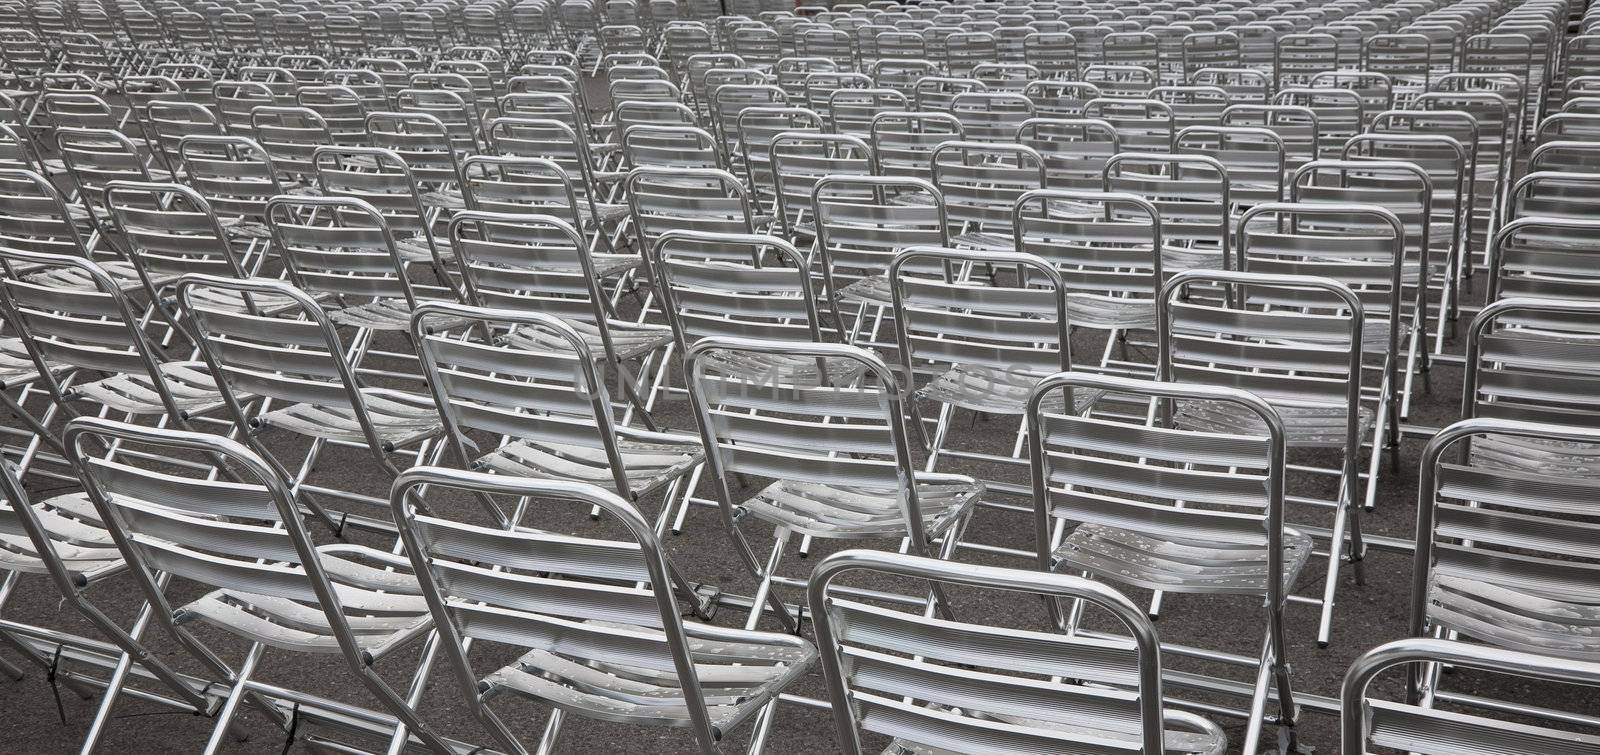 Rows of empty metal chairs after rain at an outdoor urban arena at summertime.